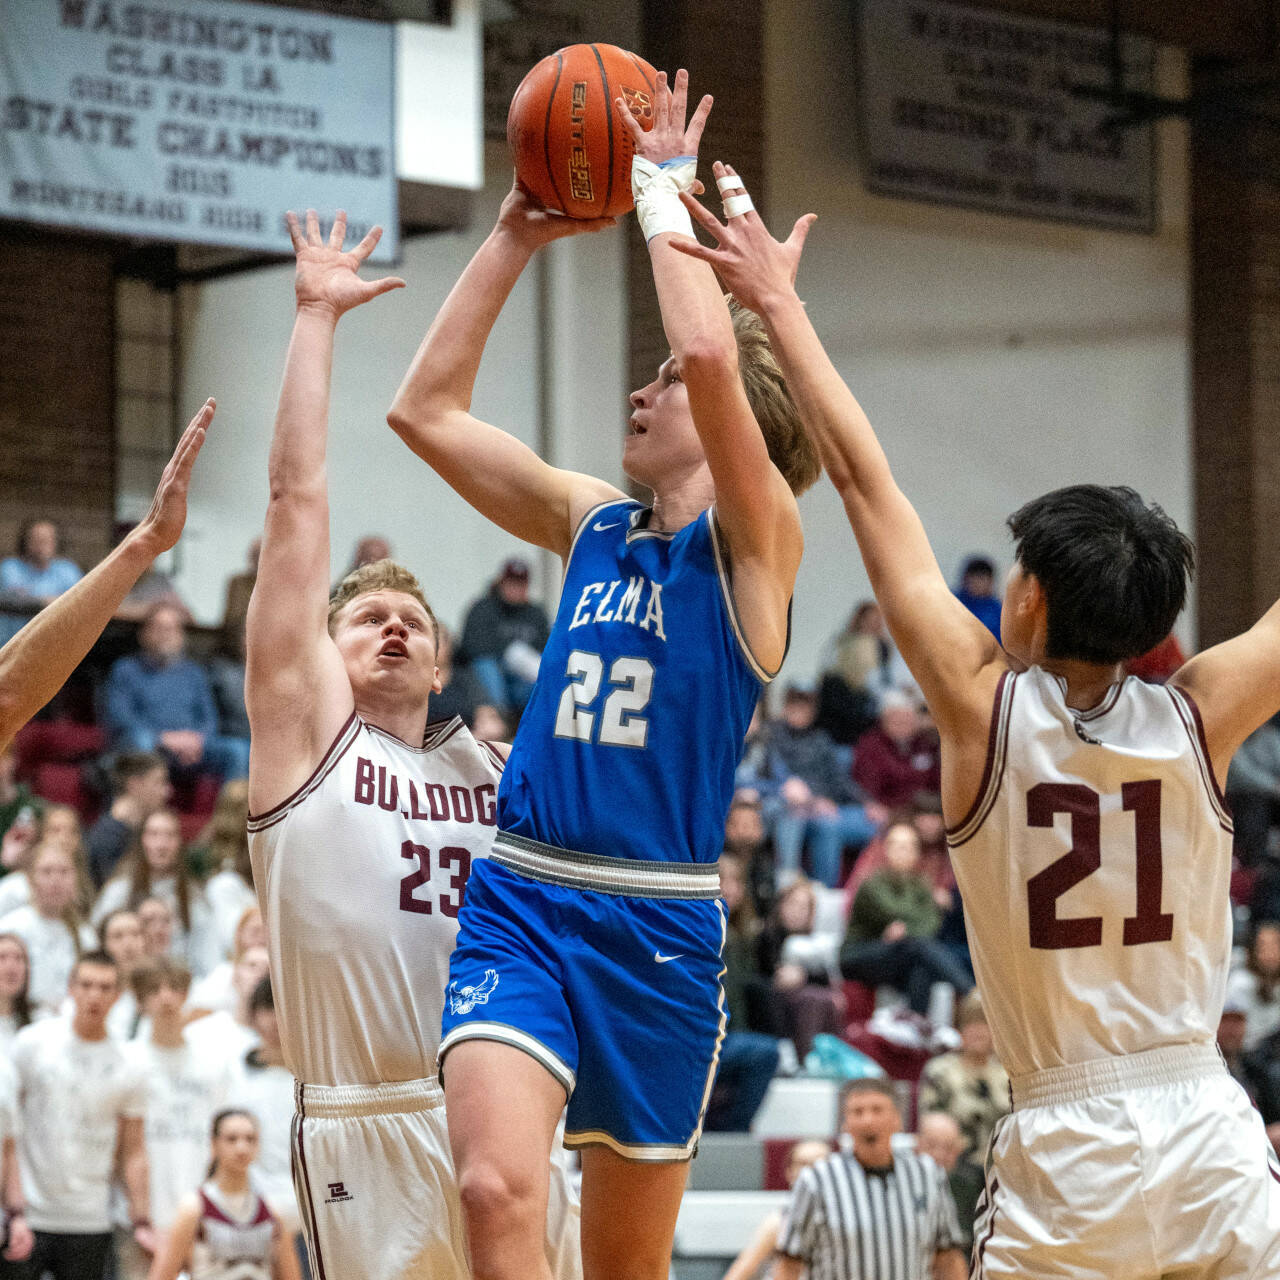 PHOTO BY FOREST WORGUM Elma’s Cason Seaberg (22) drives to the basket against Montesano’s Tyce Peterson (23) and Delon Chan during the Eagles’ 56-53 win on Tuesday in Montesano.